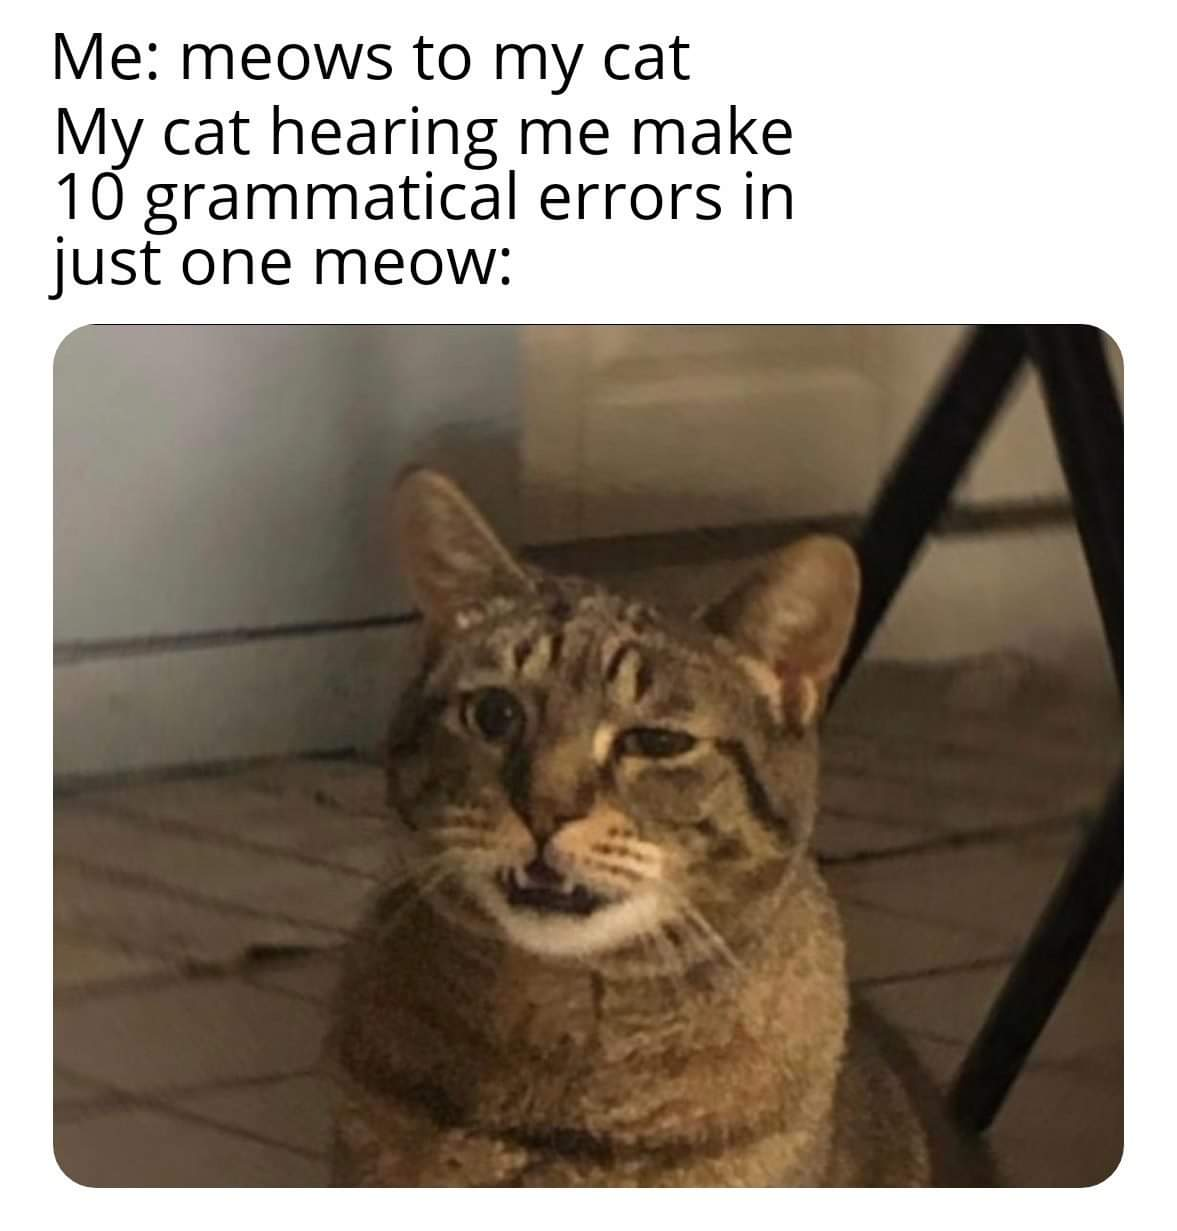 Internet meme - Me meows to my cat My cat hearing me make 10 grammatical errors in just one meow